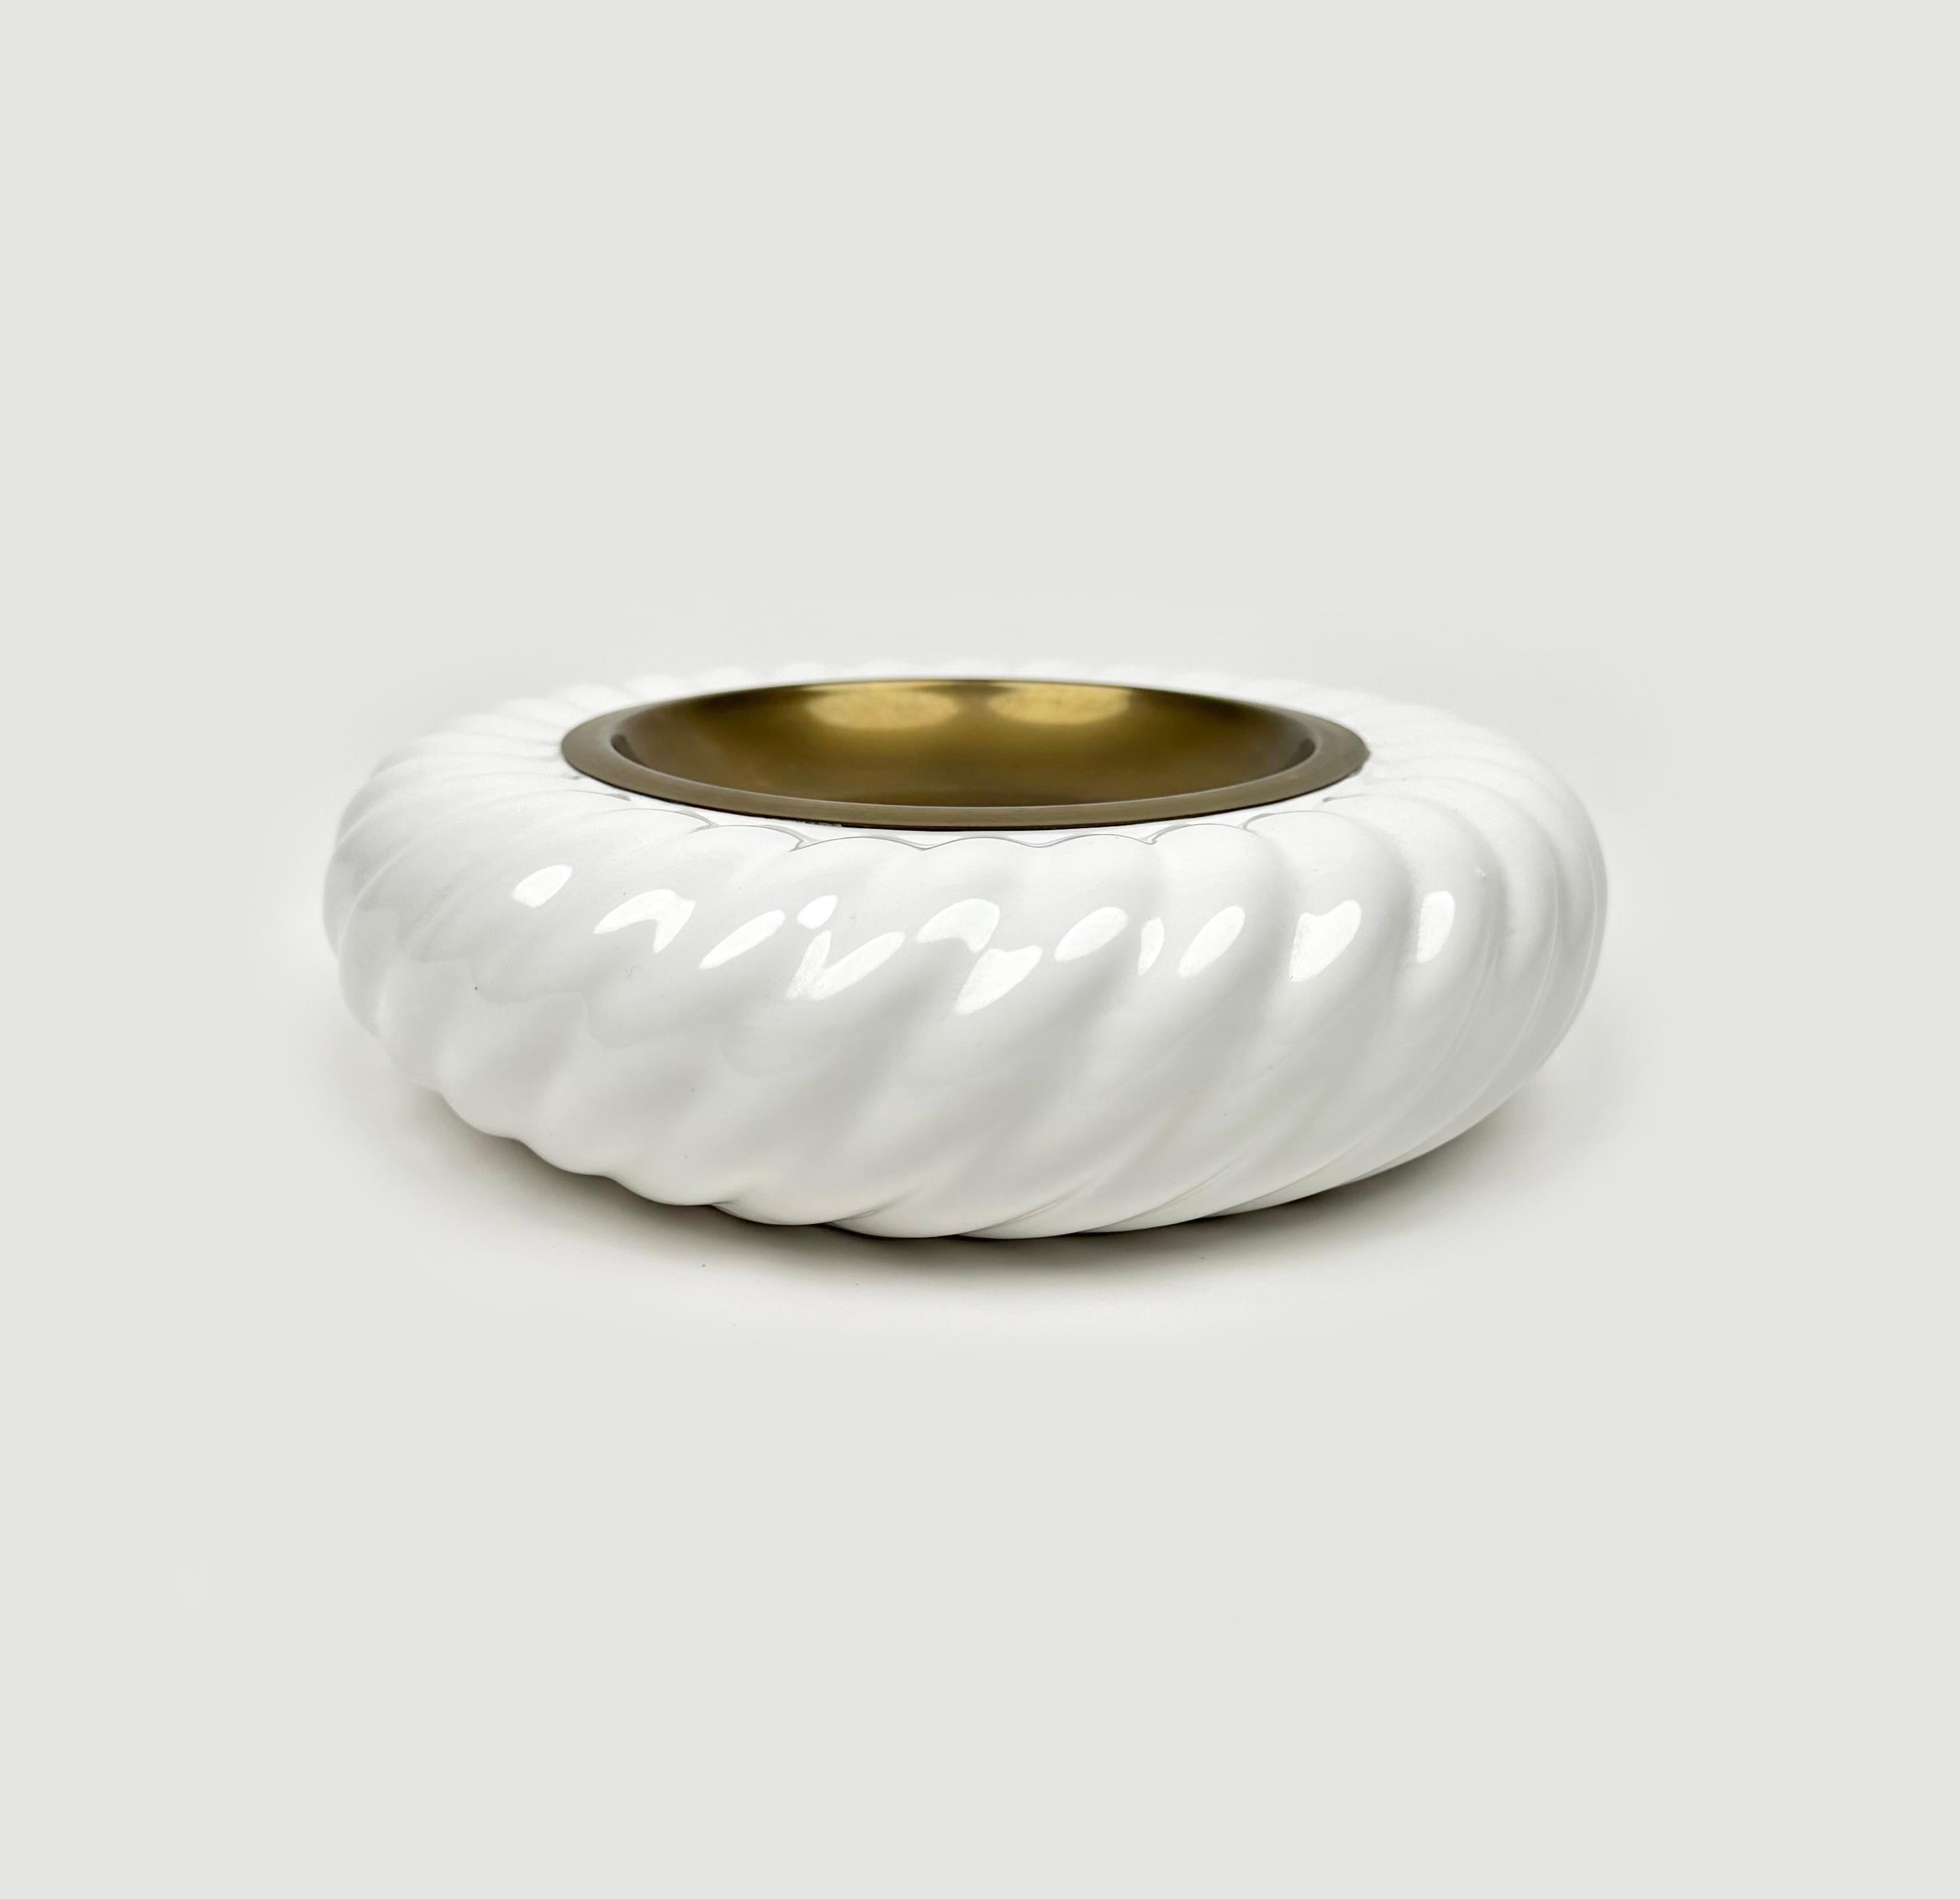 Vide-Poche or Ashtray White Ceramic and Brass by Tommaso Barbi, Italy 1970s For Sale 3